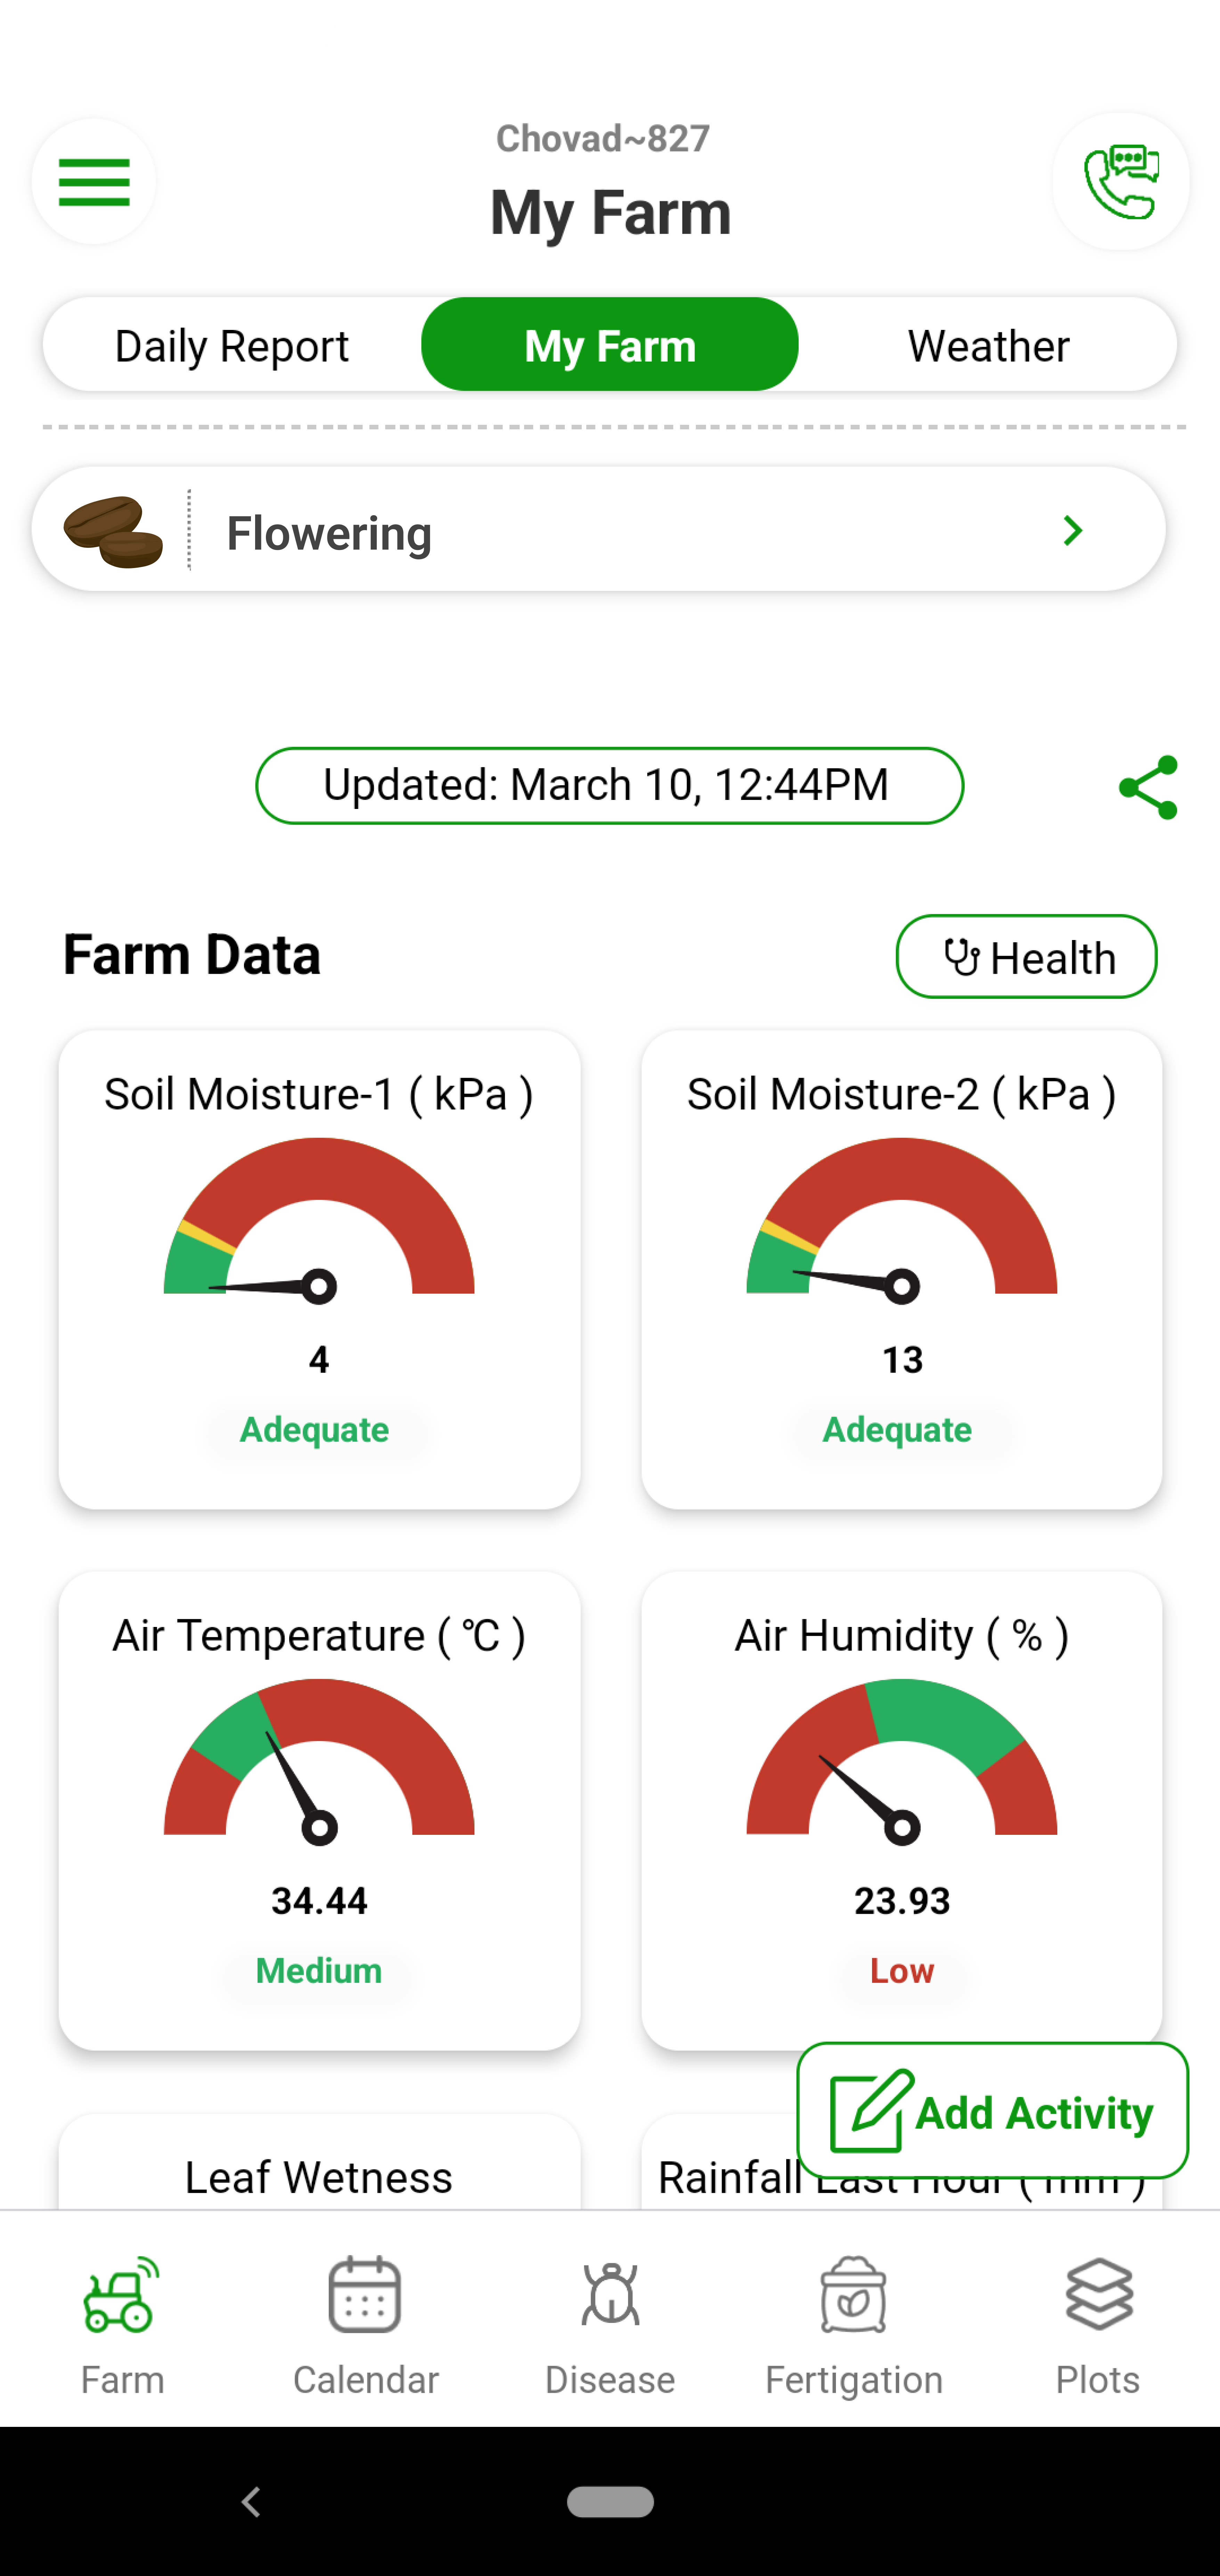 Fyllo device installed at your garden monitors your garden 24*7 and captures 12 critical parameters in real time. You get this data on you mobile and dashboard in real time. You get to monitor where the crop is getting enough sunlight, proper temperature or humidity.